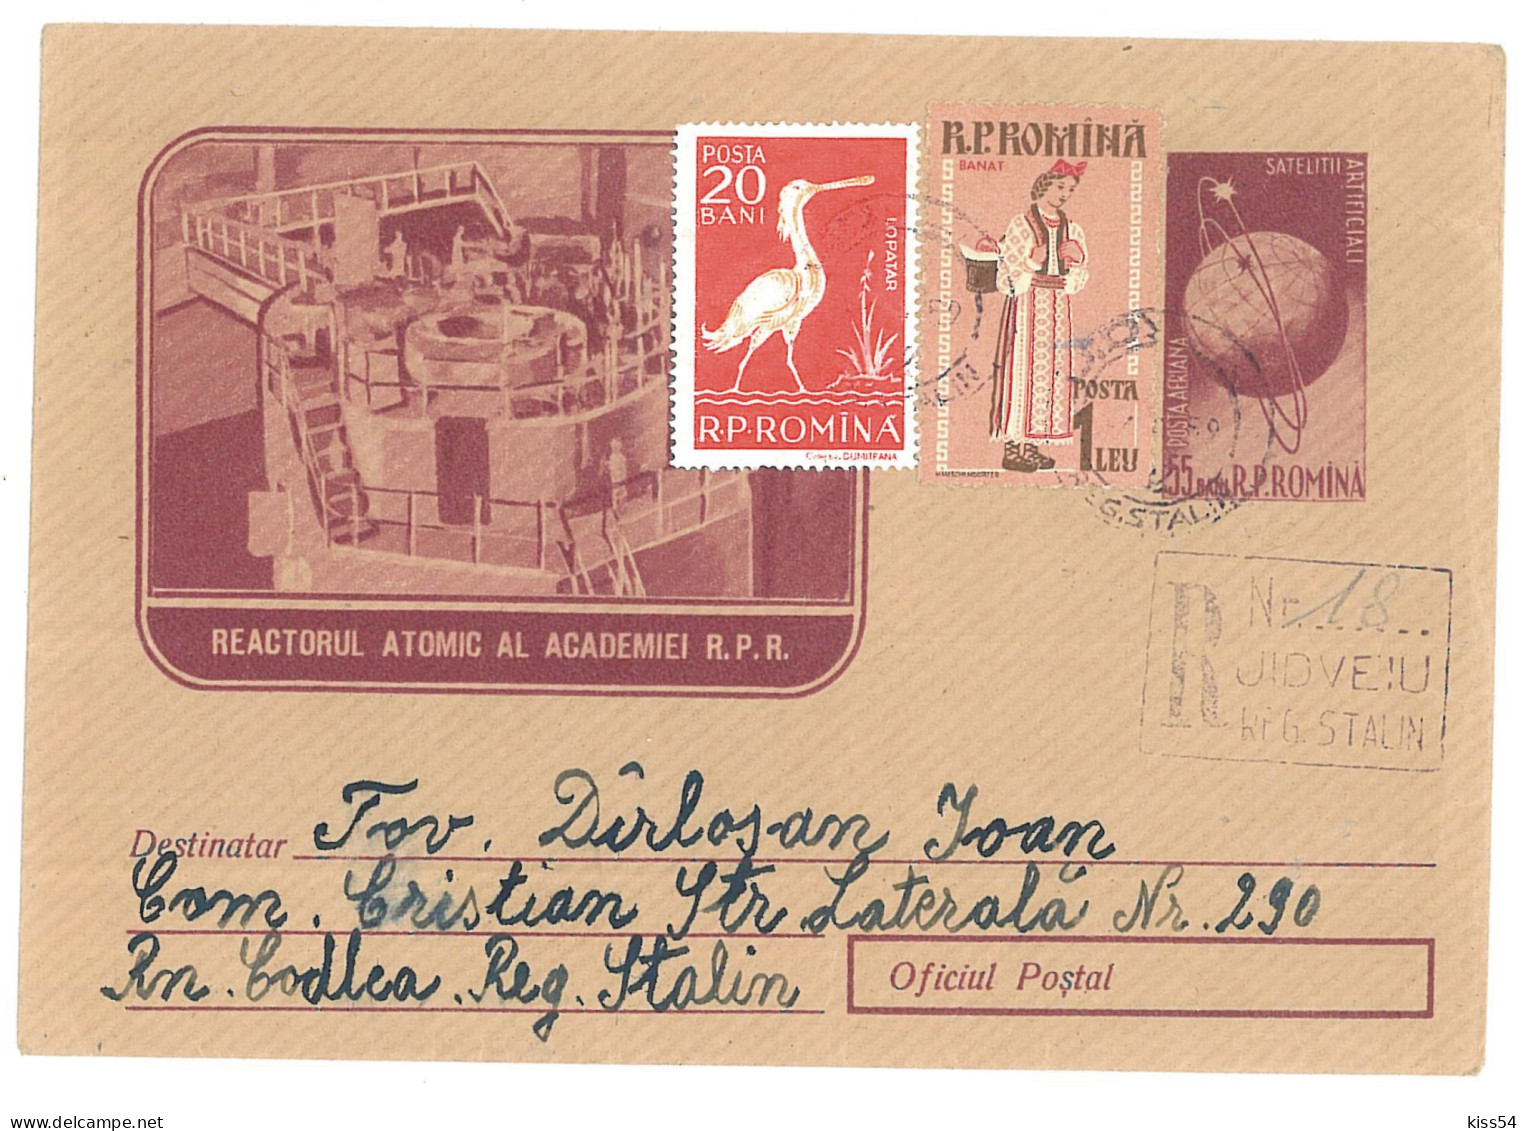 IP 58 A - 0119d-b ENERGY, Atomic Reactor, Romania - REGISTERED Stationery - Used - 1958 - Atome